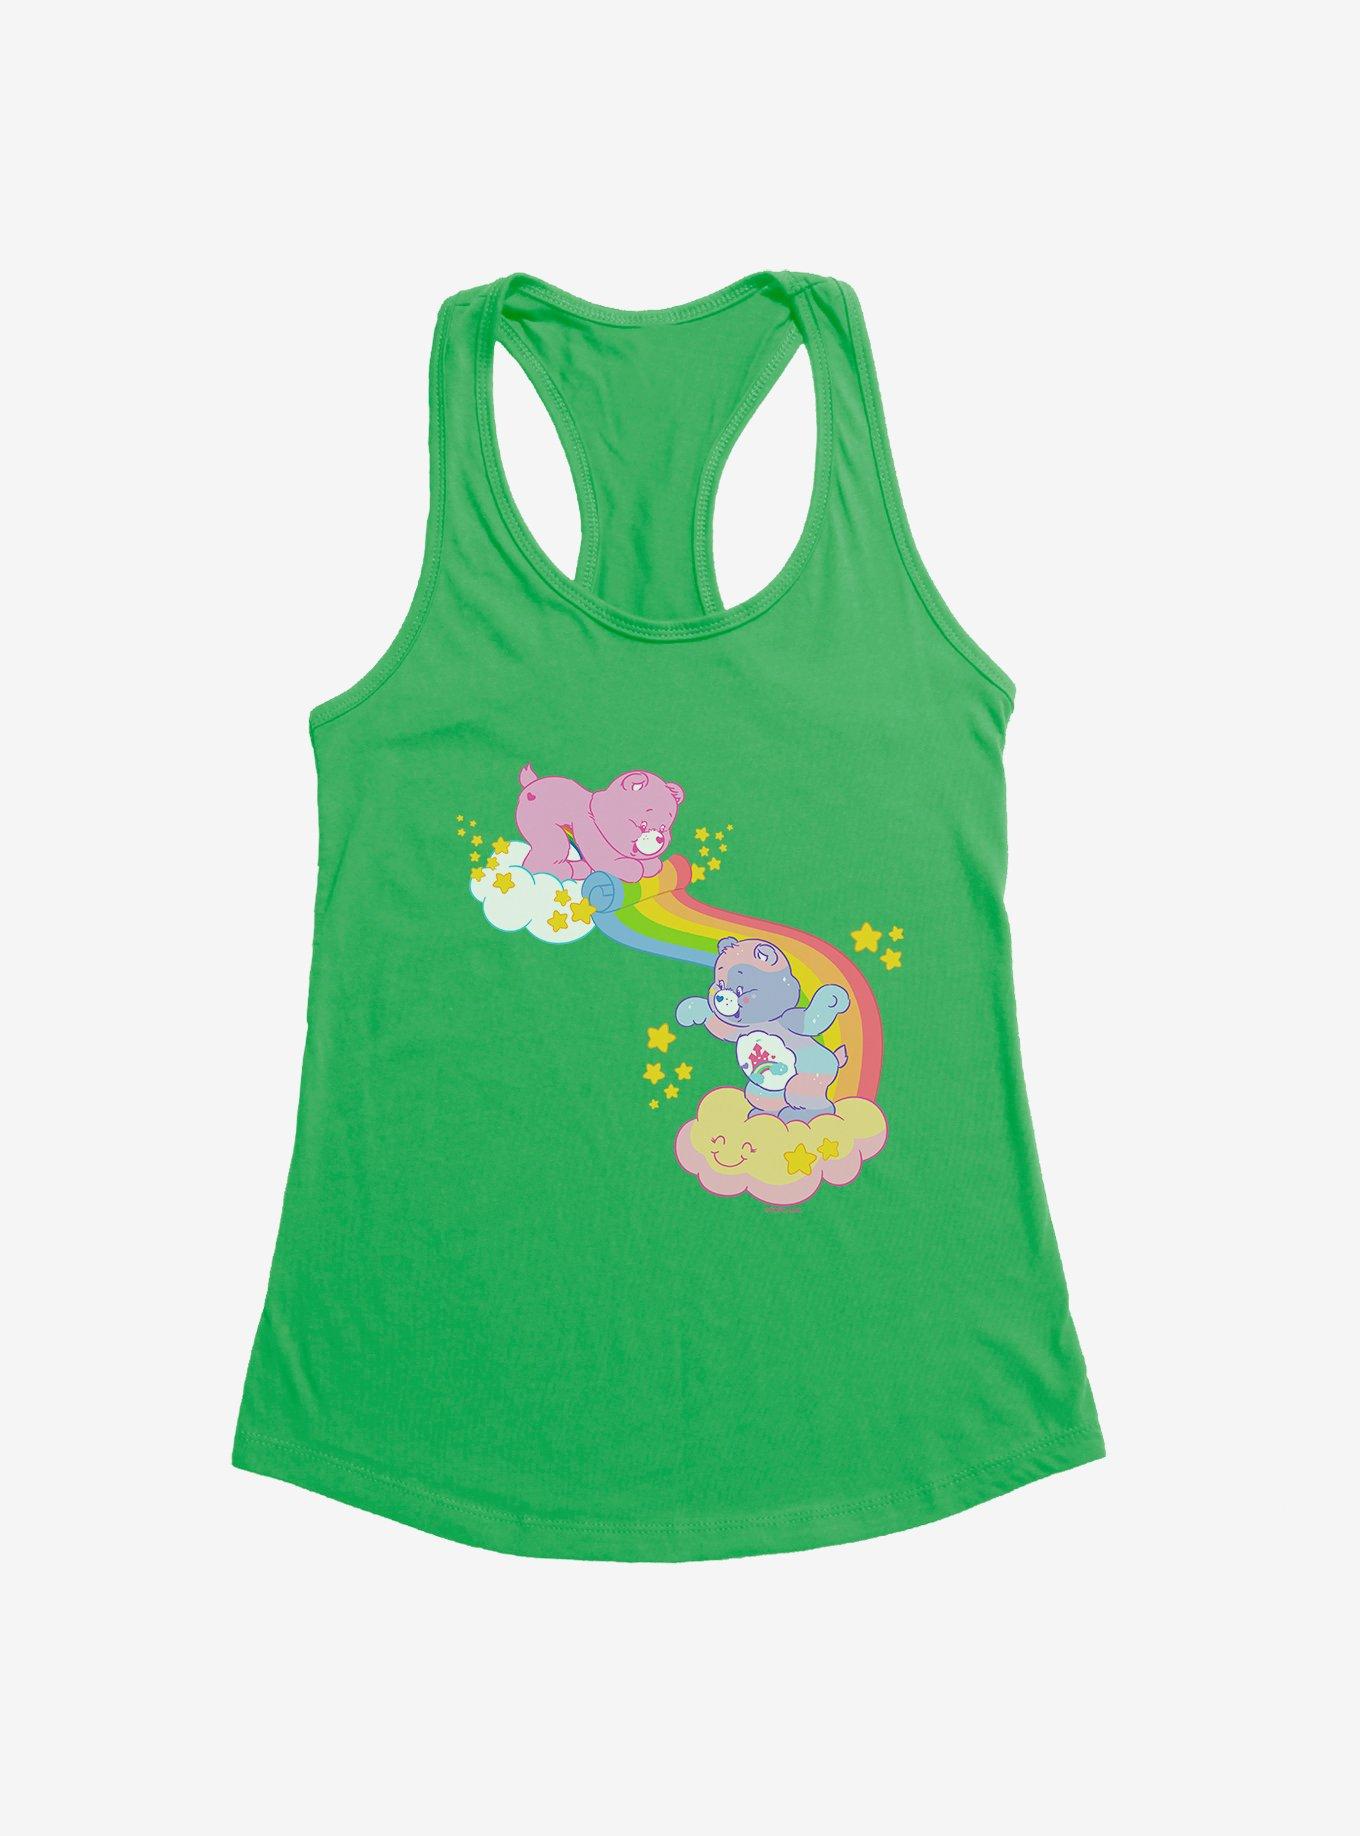 Care Bears In The Clouds Girls Tank, KELLY GREEN, hi-res